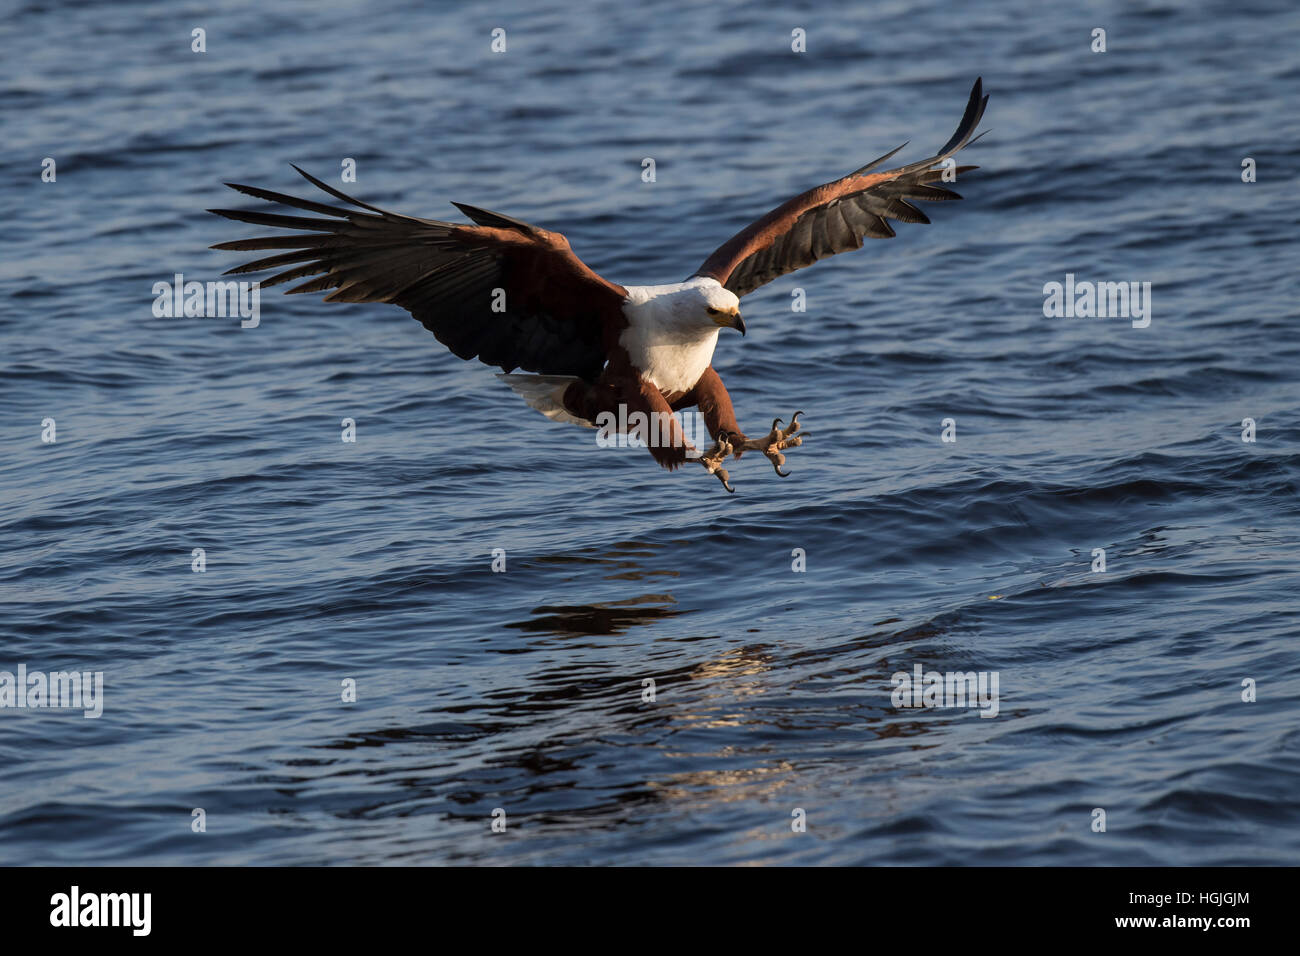 African fish eagle (Haliaeetus vocifer) when fishing with outstretched claws, Chobe River, Chobe National Park, Botswana Stock Photo